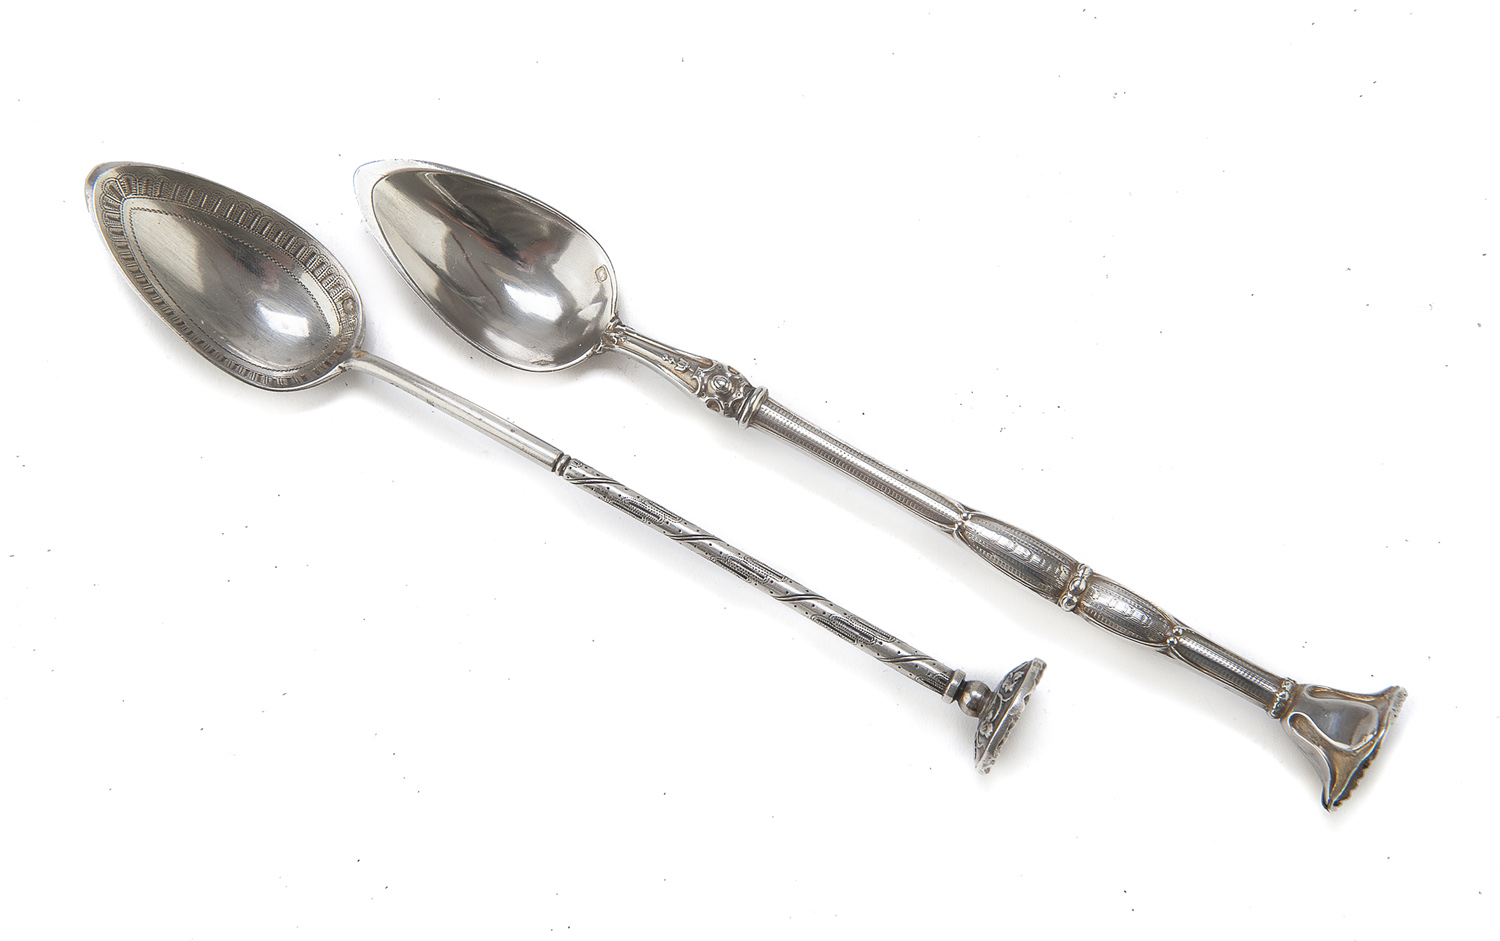 TWO SILVER COKTAIL SPOONS PARIS PUNCH LATE 19th CENTURY